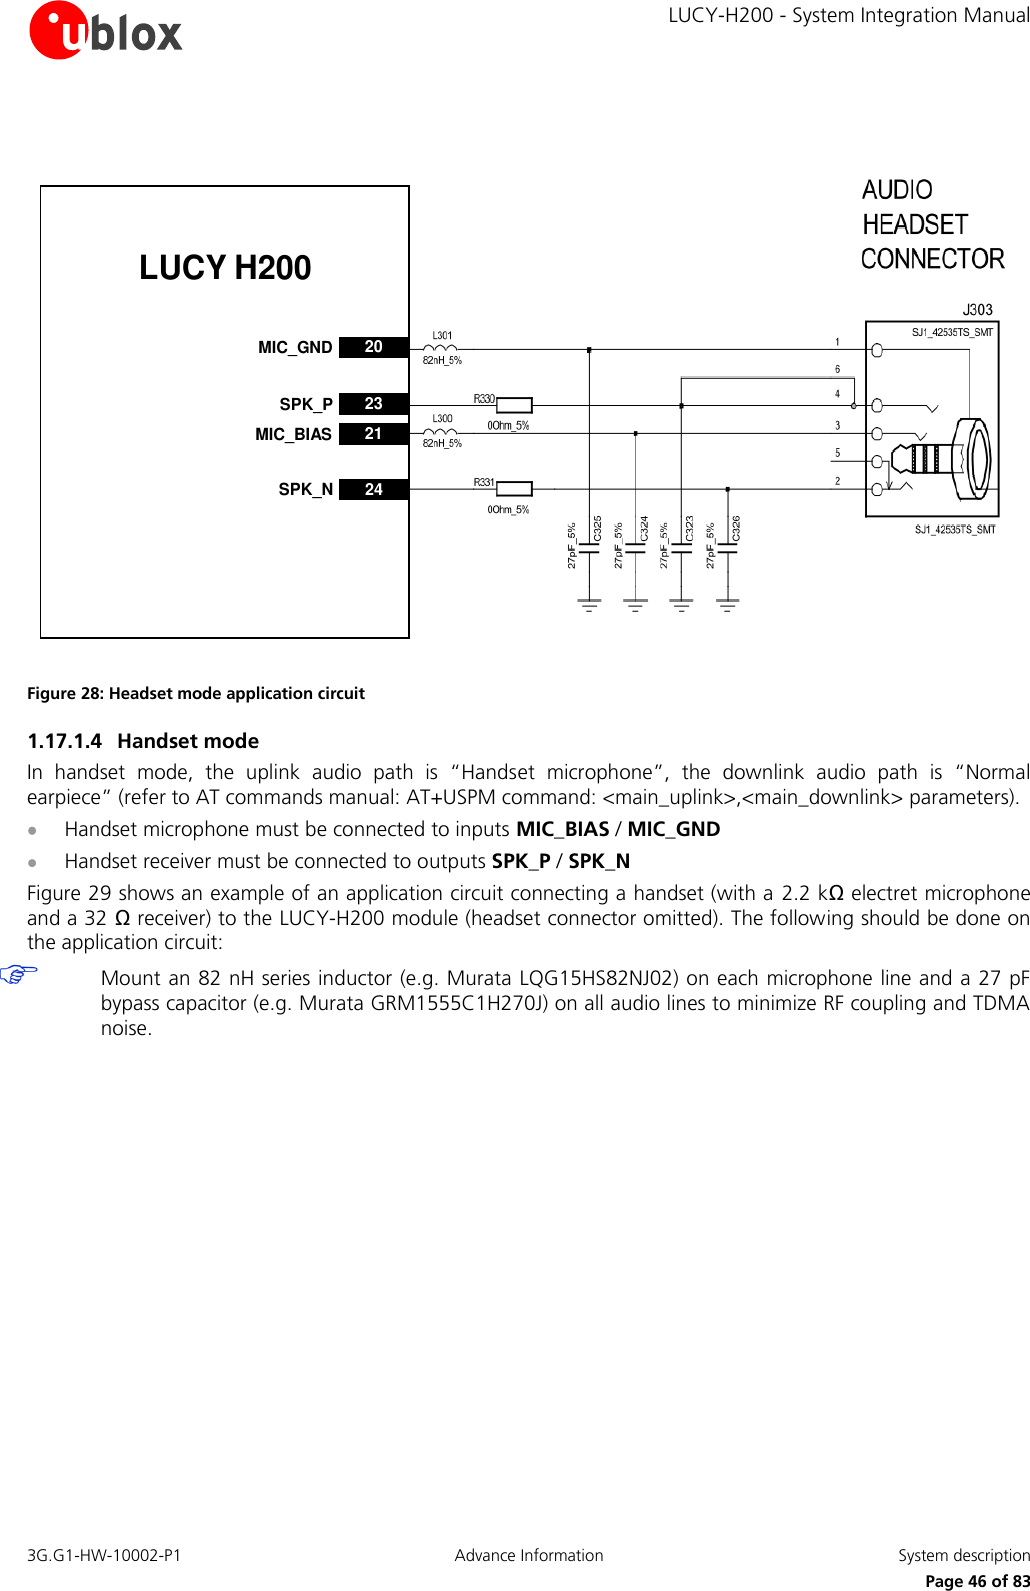     LUCY-H200 - System Integration Manual 3G.G1-HW-10002-P1  Advance Information  System description      Page 46 of 83 LUCY H20021MIC_BIAS20MIC_GND23SPK_P24SPK_N Figure 28: Headset mode application circuit 1.17.1.4 Handset mode In  handset  mode,  the  uplink  audio  path  is  “Handset  microphone”,  the  downlink  audio  path  is  “Normal earpiece” (refer to AT commands manual: AT+USPM command: &lt;main_uplink&gt;,&lt;main_downlink&gt; parameters).  Handset microphone must be connected to inputs MIC_BIAS / MIC_GND  Handset receiver must be connected to outputs SPK_P / SPK_N Figure 29 shows an example of an application circuit connecting a handset (with a 2.2 kΩ electret microphone and a 32 Ω receiver) to the LUCY-H200 module (headset connector omitted). The following should be done on the application circuit:  Mount an 82 nH series inductor (e.g. Murata LQG15HS82NJ02) on each microphone line and a 27 pF bypass capacitor (e.g. Murata GRM1555C1H270J) on all audio lines to minimize RF coupling and TDMA noise. 